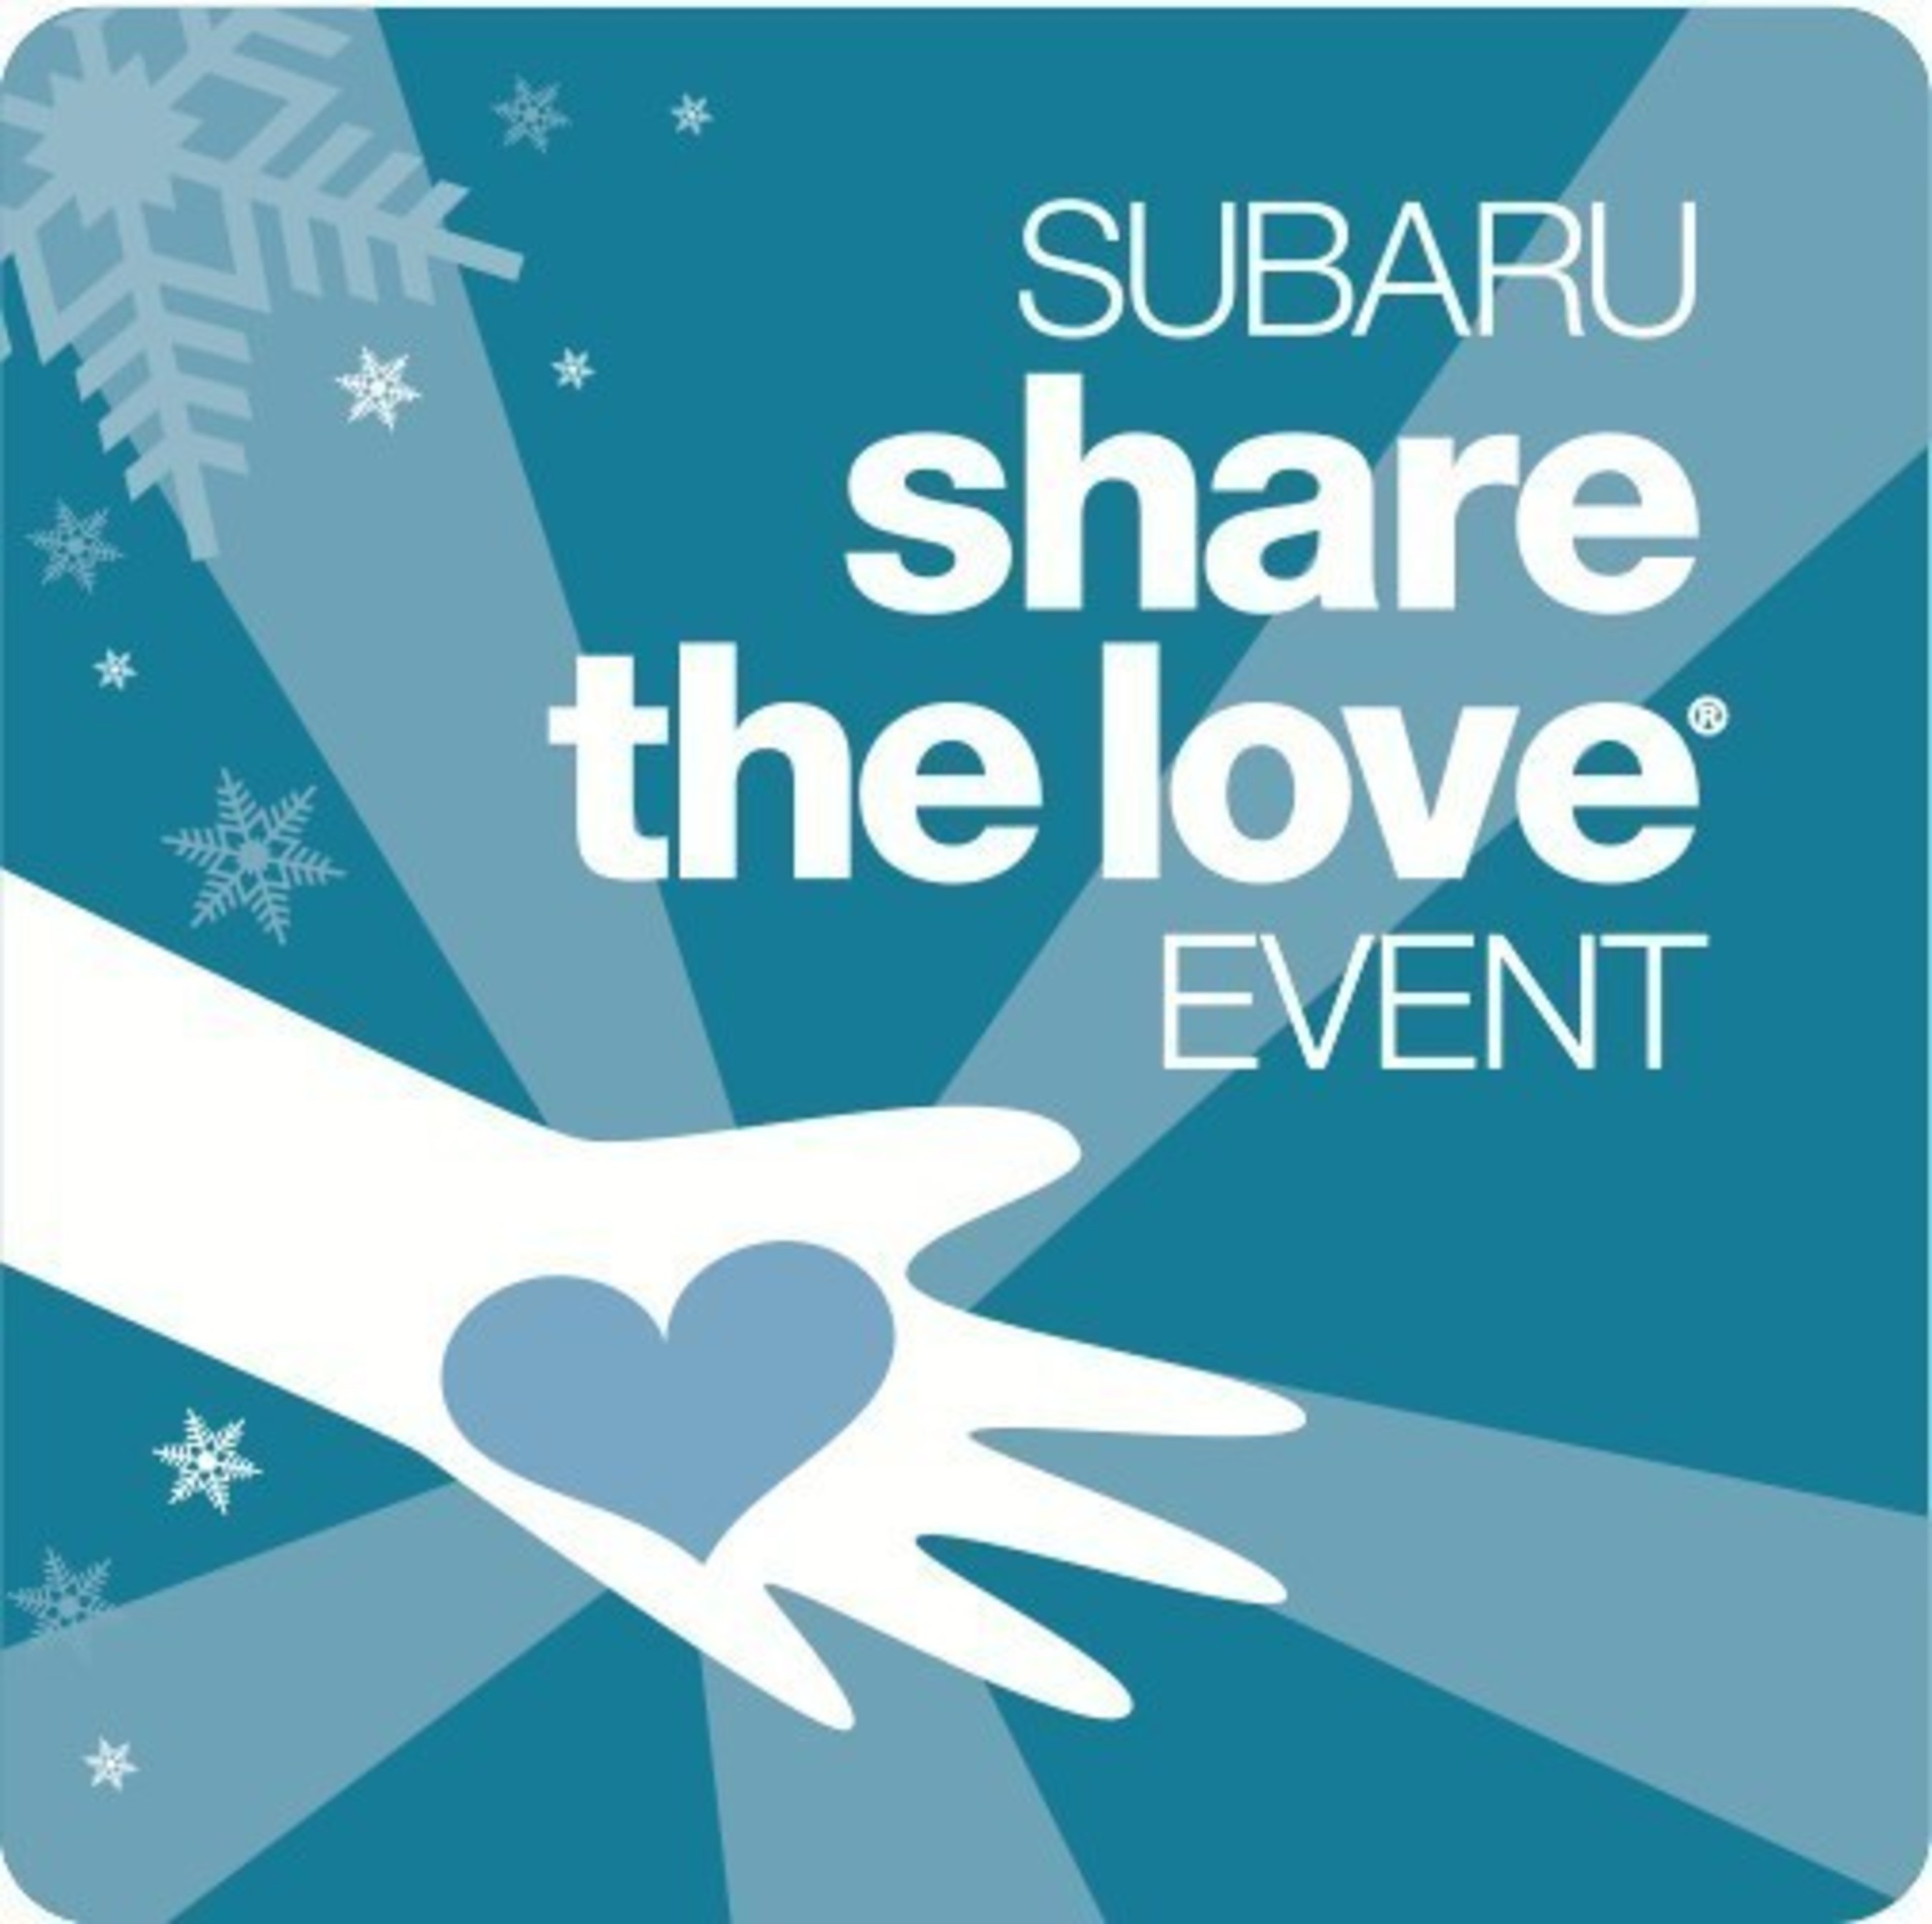 New Subaru Advertising Campaign Brings to Life the Impact of the Share the Love Event